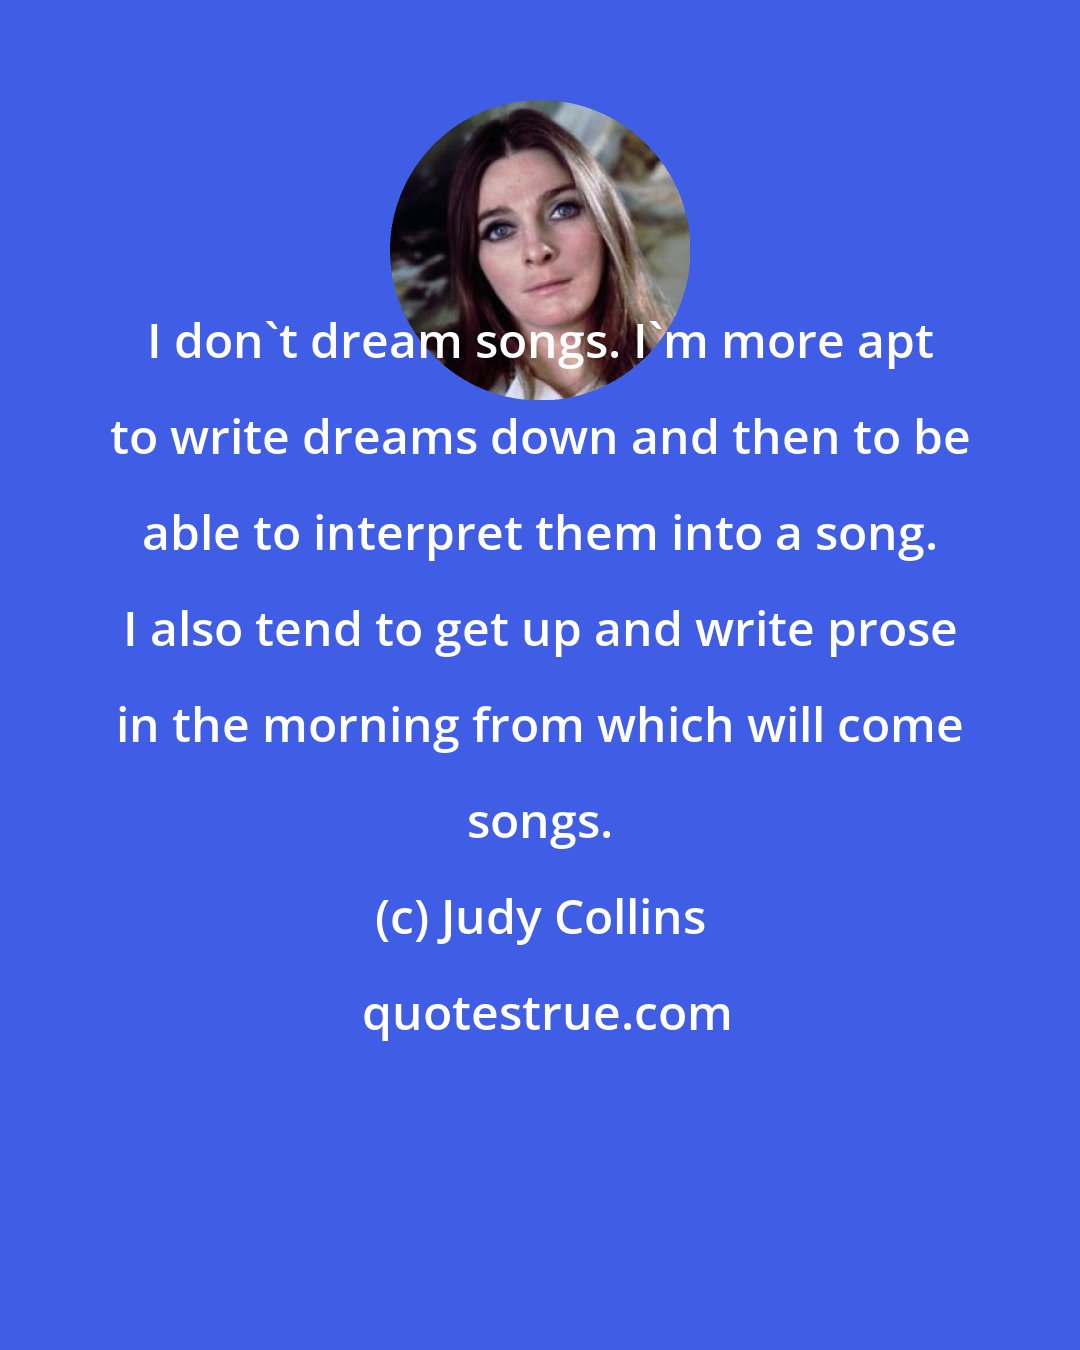 Judy Collins: I don't dream songs. I'm more apt to write dreams down and then to be able to interpret them into a song. I also tend to get up and write prose in the morning from which will come songs.